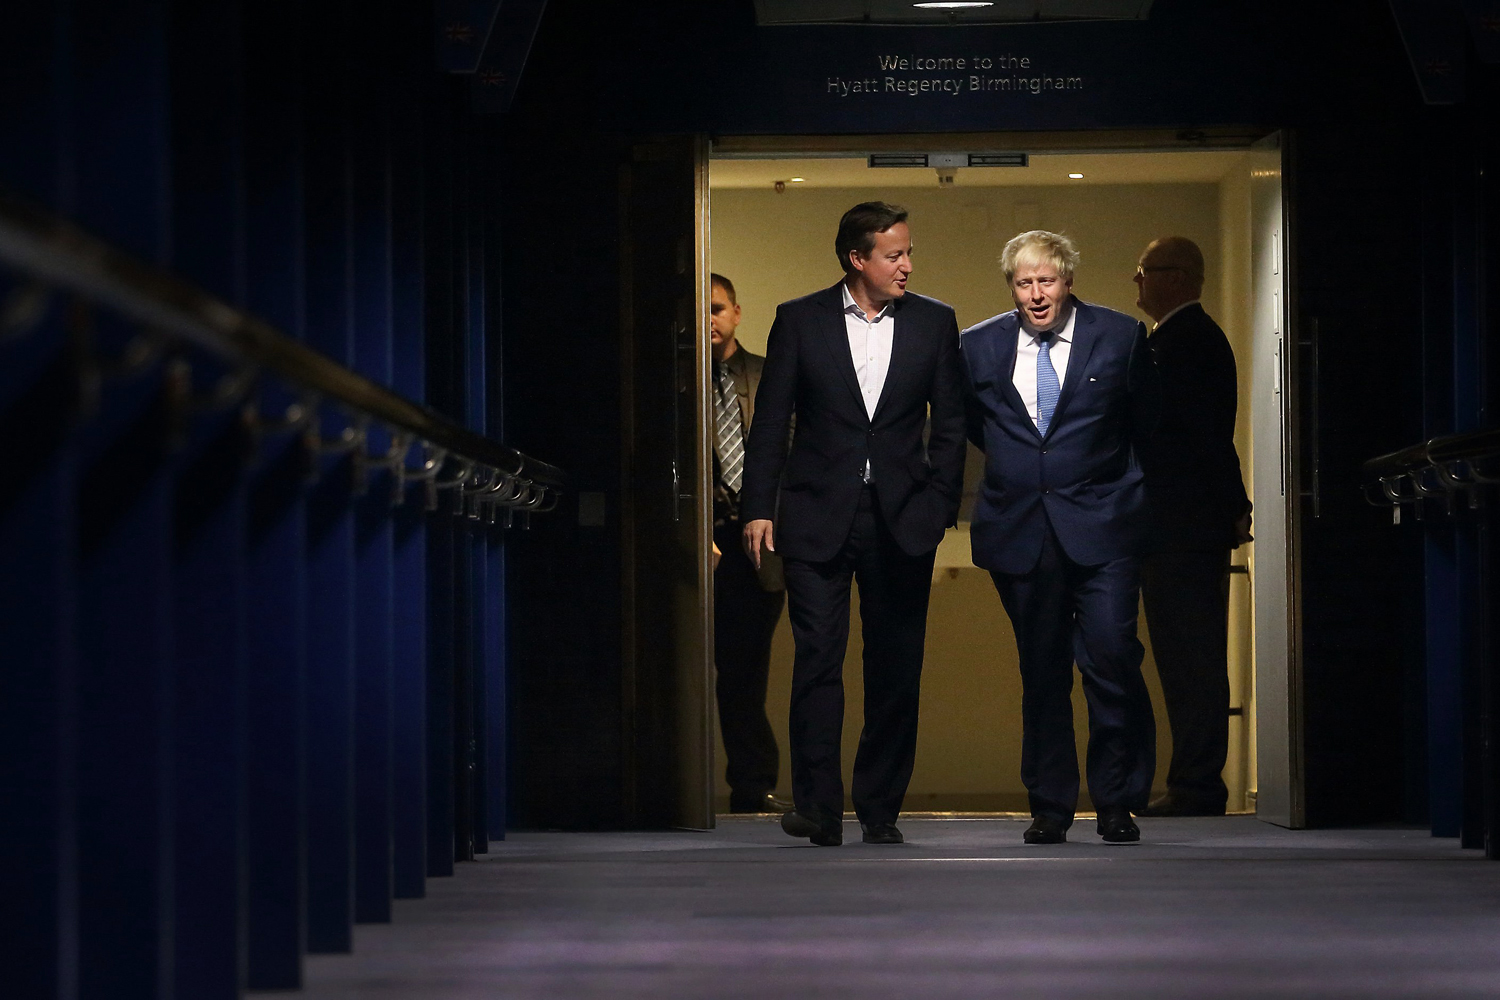 Prime Minister David Cameron walks with Mayor of London and Parliamentary candidate Boris Johnson at the Conservative party conference on Sept. 29, 2014 in Birmingham, England.